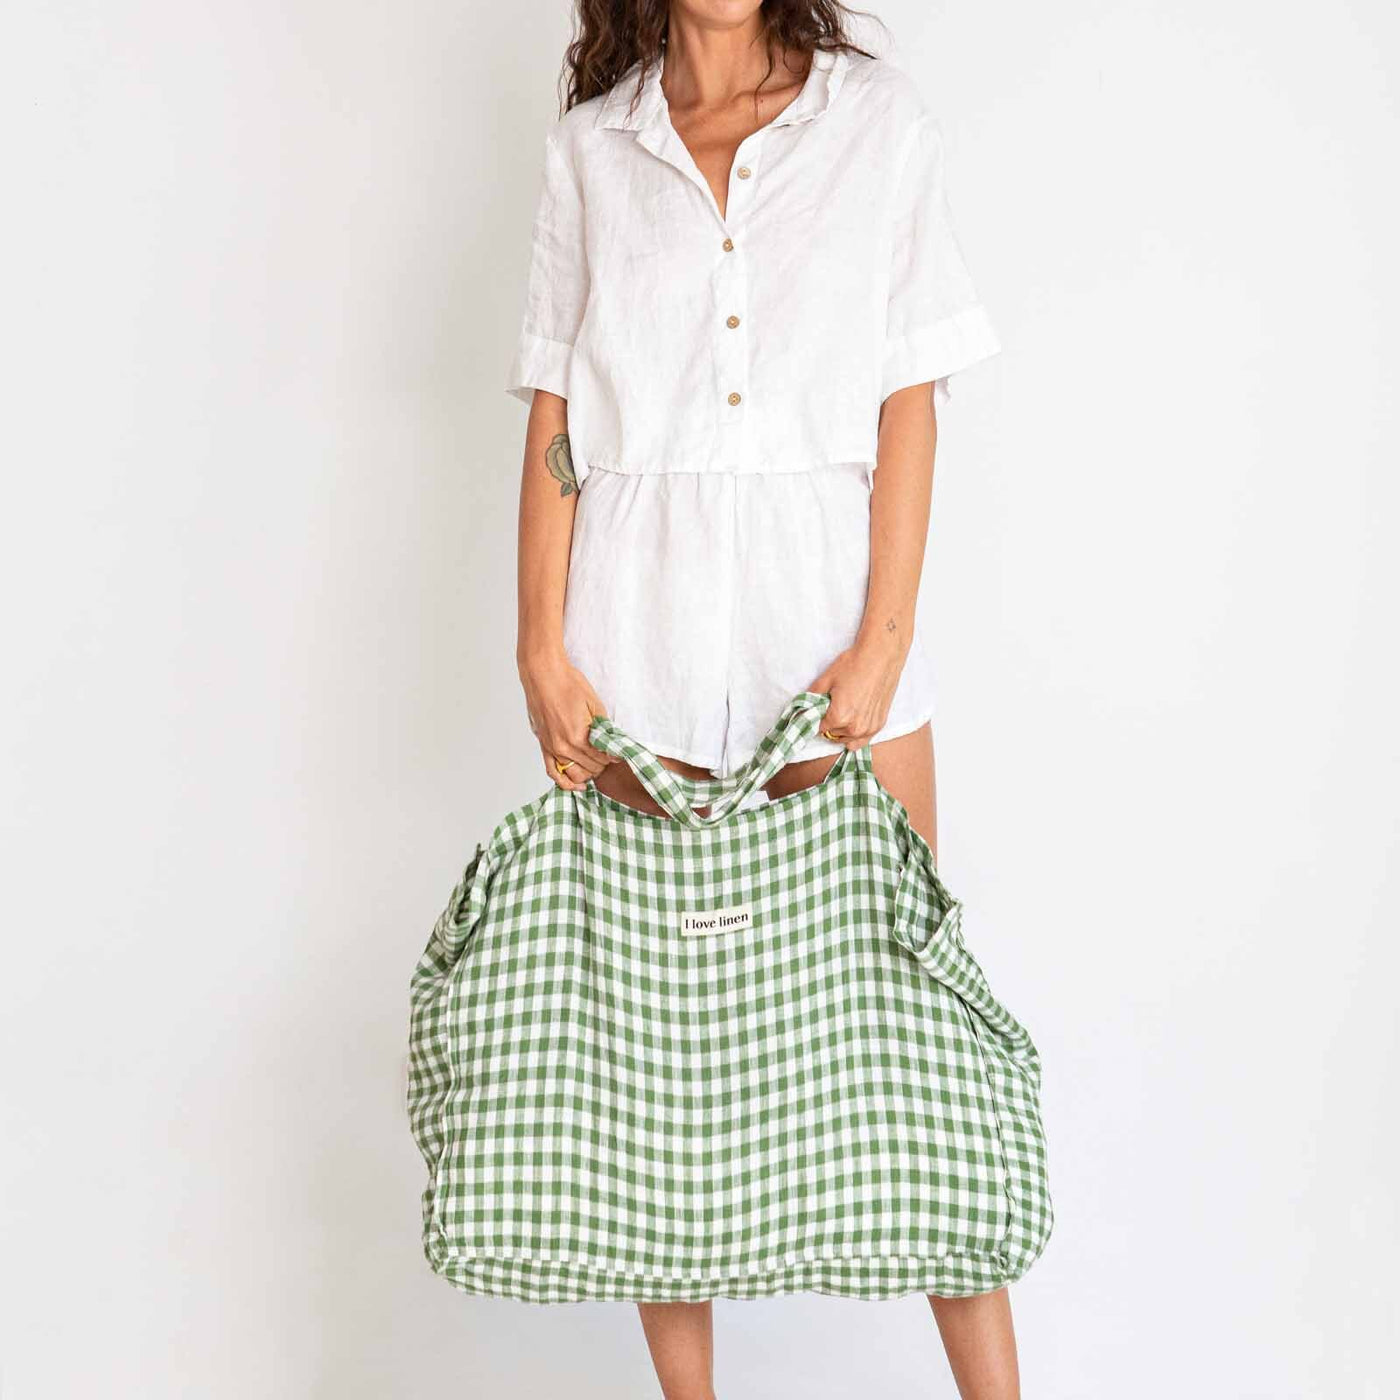 French Flax Linen Carry All Bag in Ivy Gingham